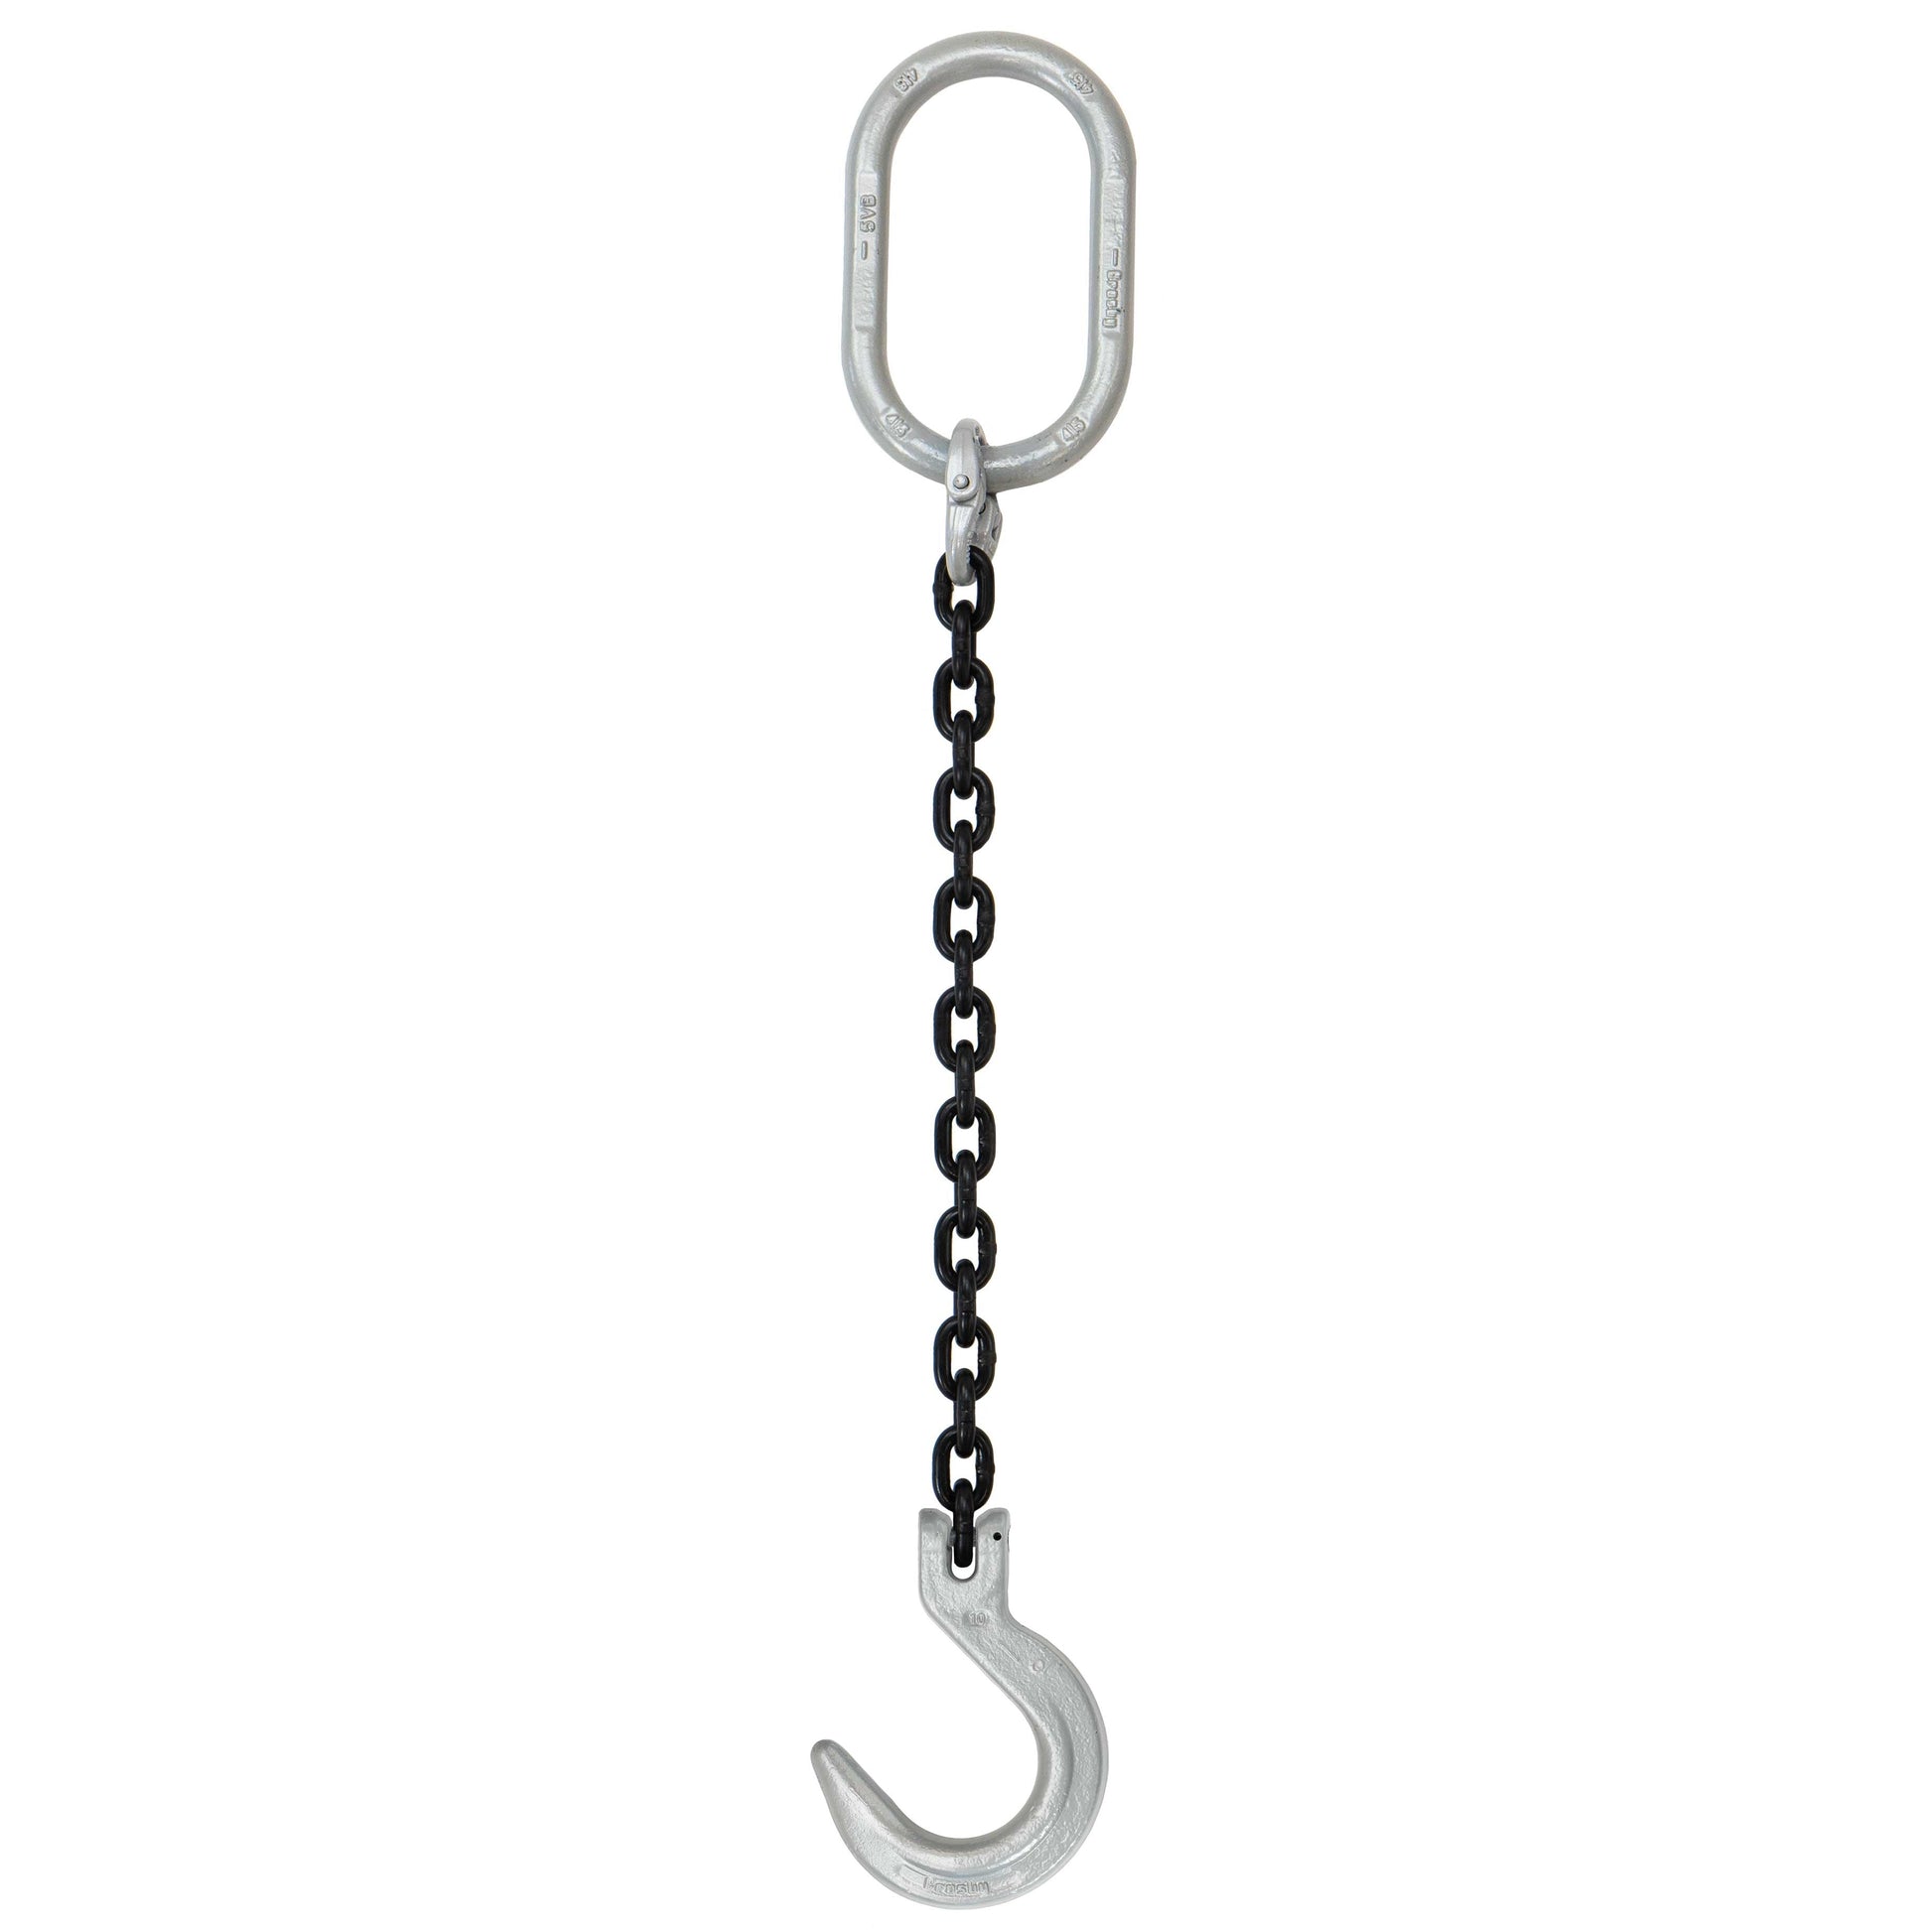 12 inch x 12 foot Domestic Single Leg Chain Sling w Crosby Foundry Hook Grade 100 image 1 of 2